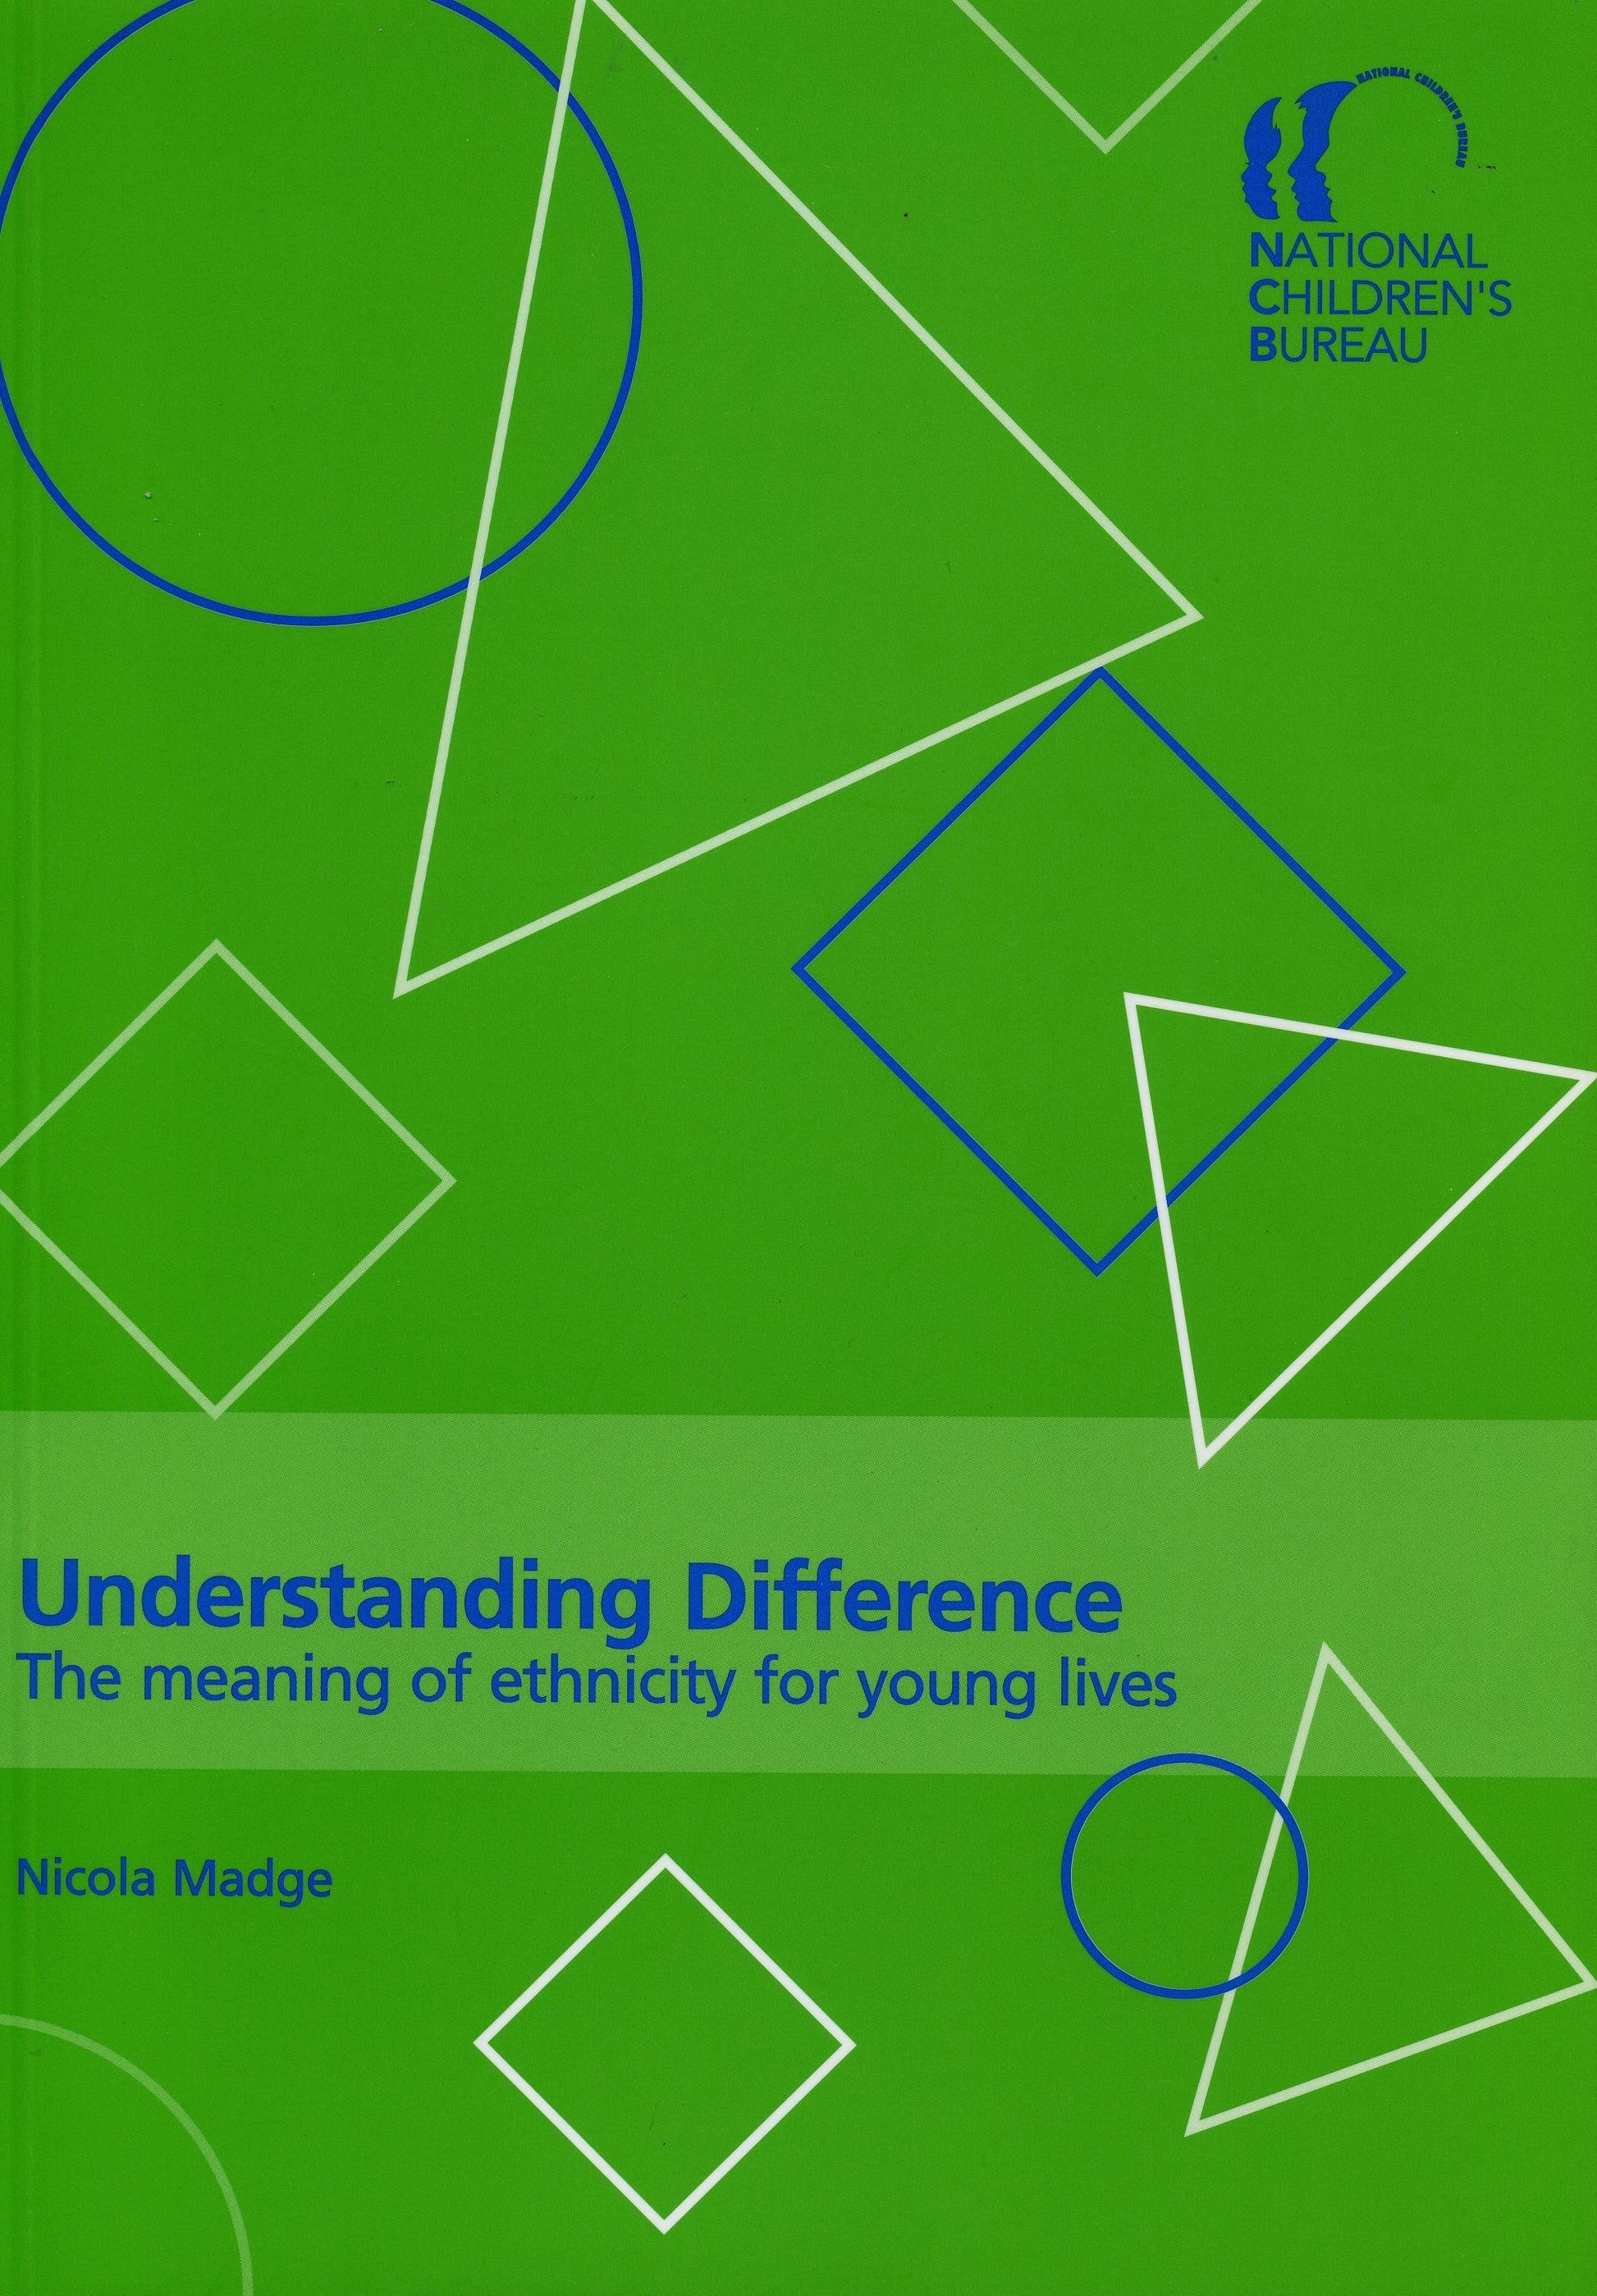 Understanding Difference by Nicola Madge